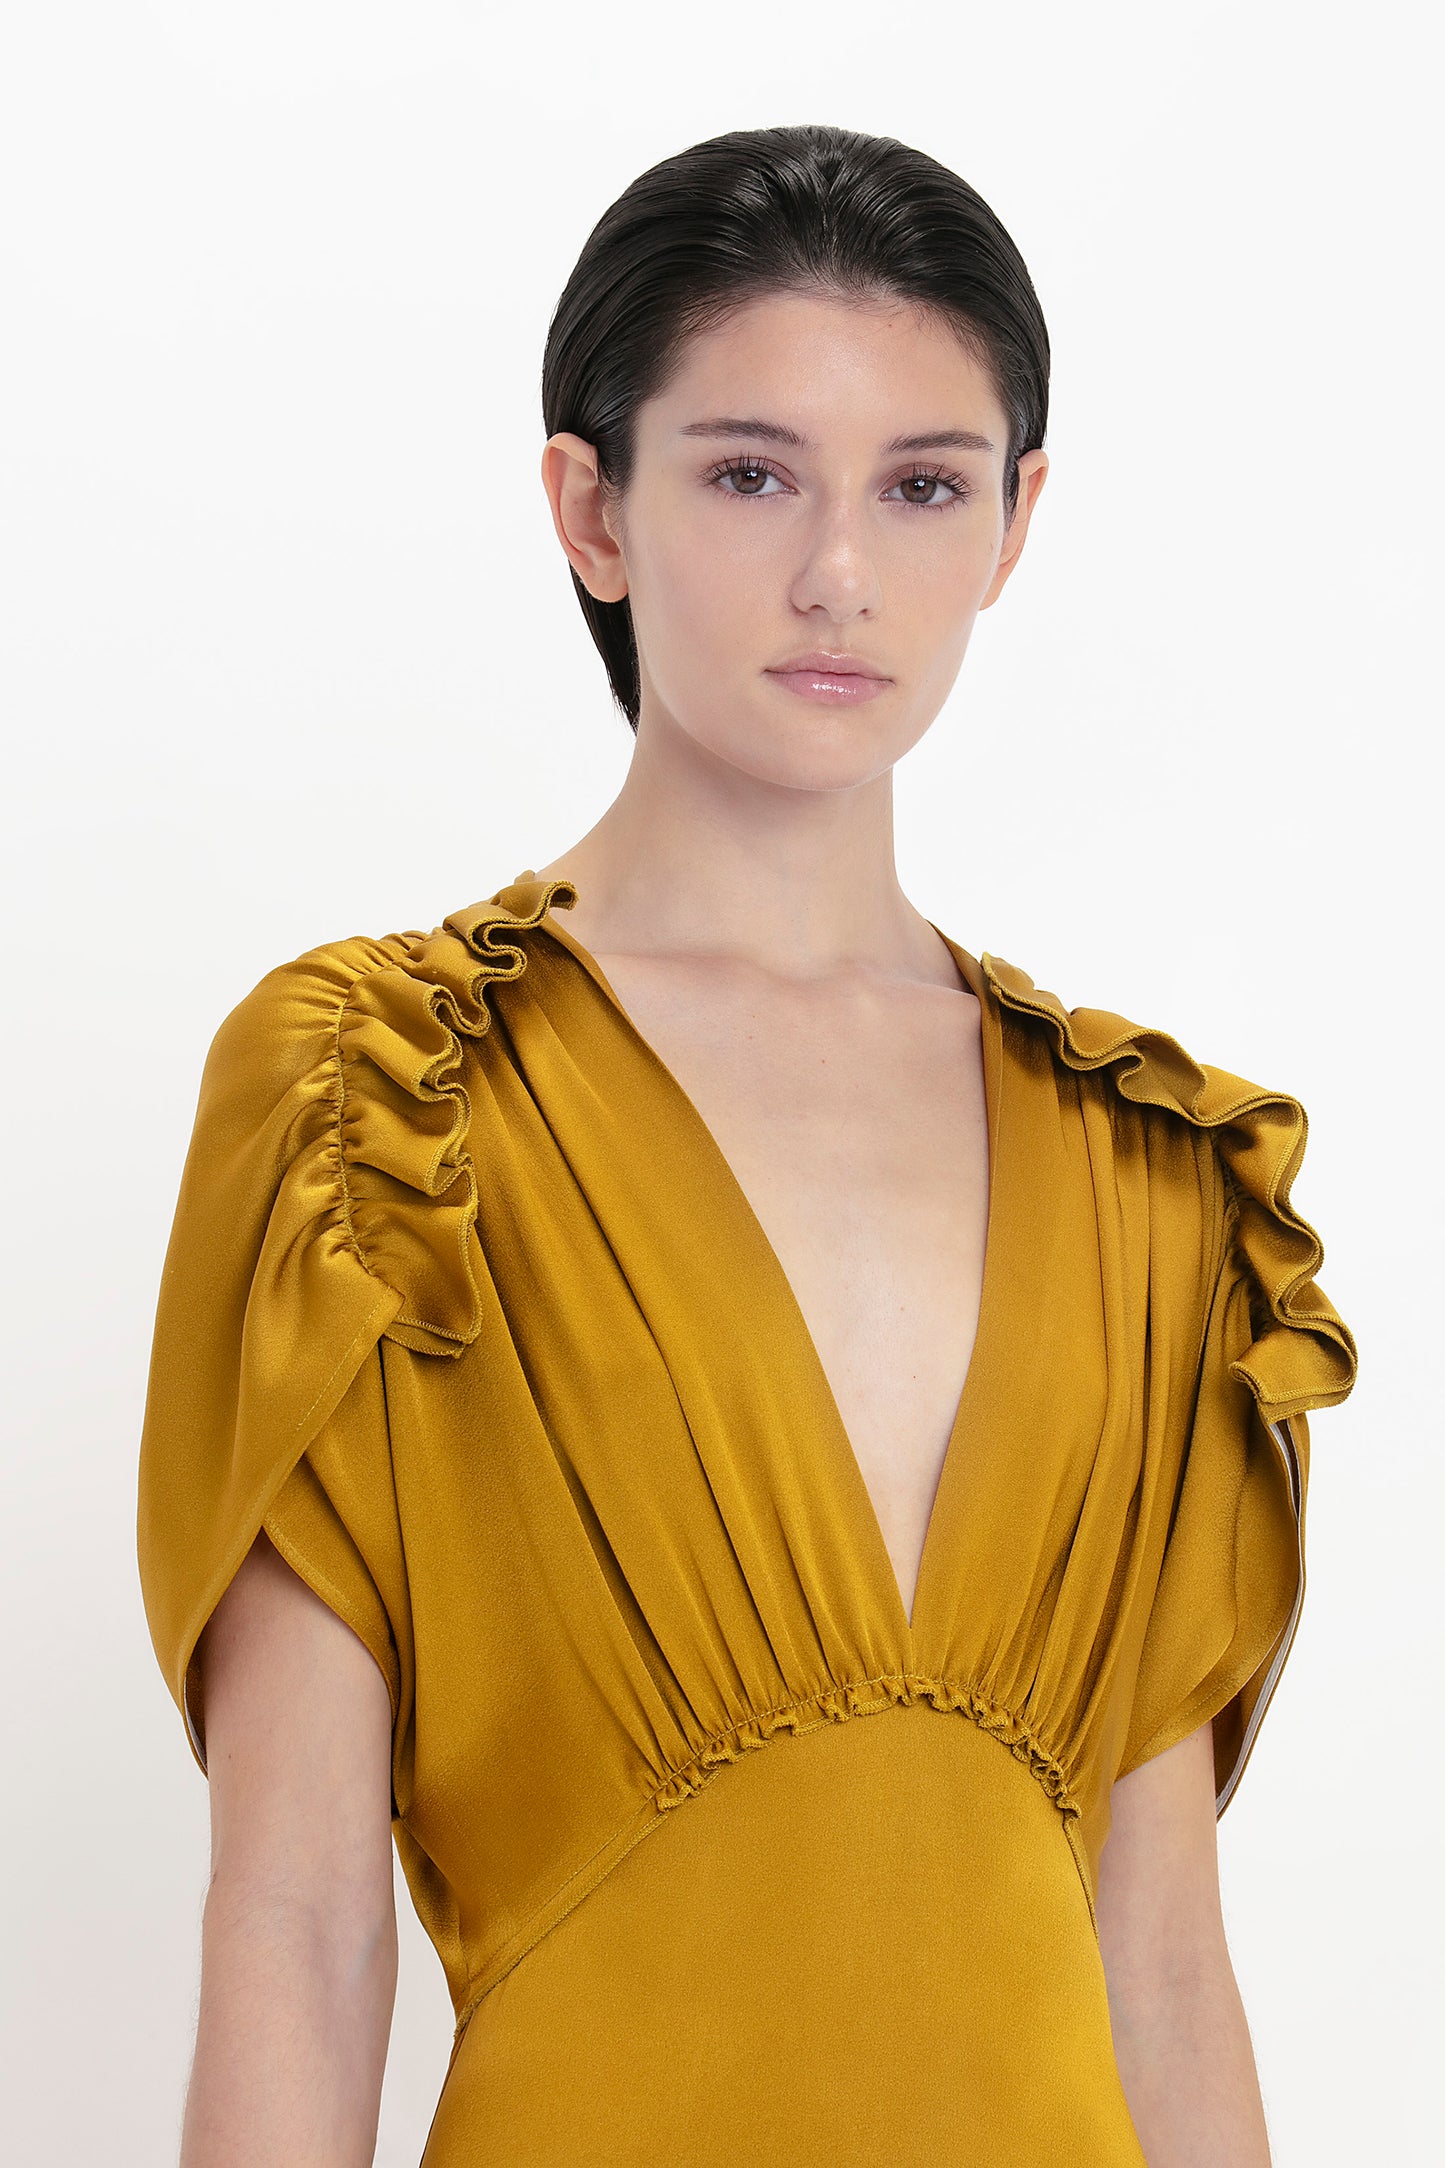 A person with short dark hair wears a V-Neck Ruffle Midi Dress In Harvest Gold by Victoria Beckham, featuring shoulder frills, voluminous ruffled sleeves, and a deep V-neckline. The background is plain white.